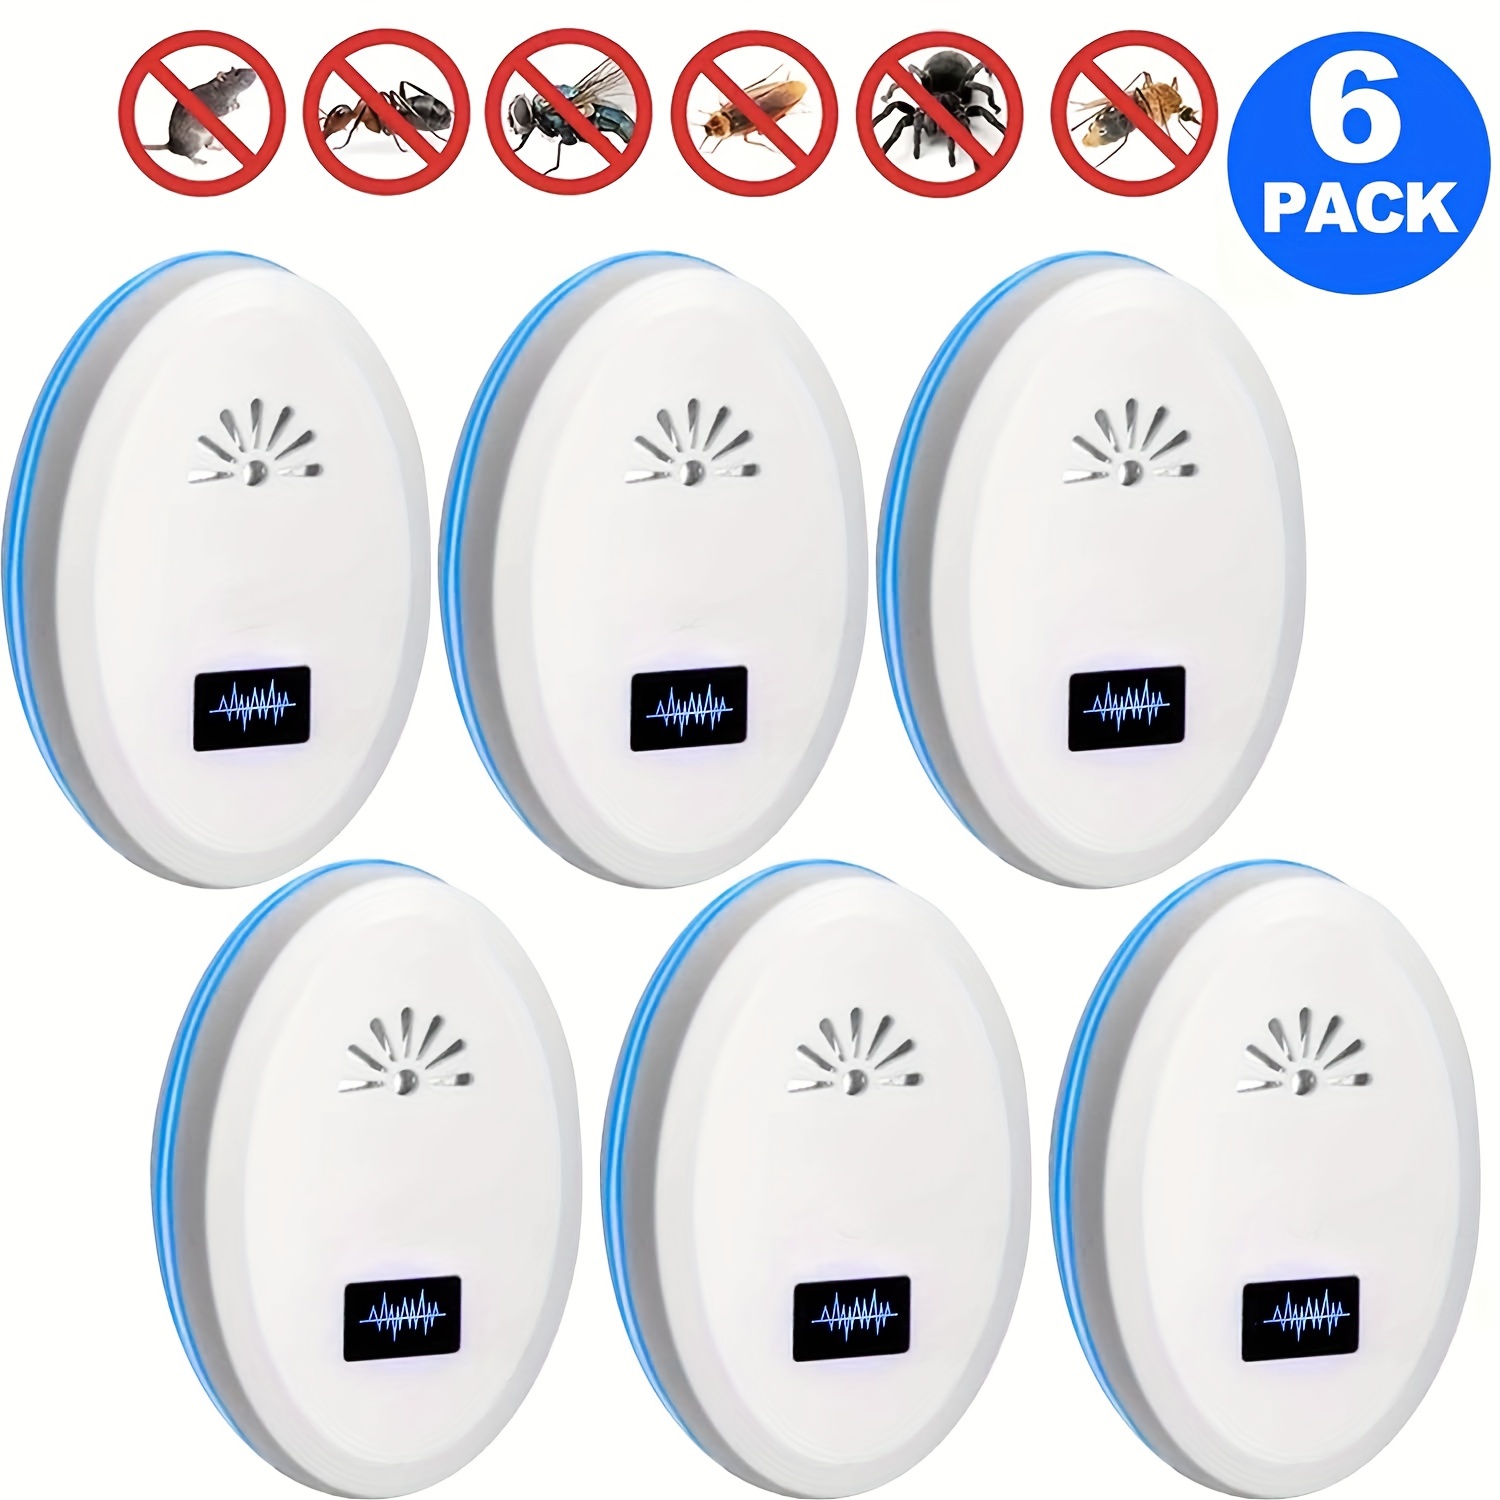 Upgraded Mouse Repellent,electronic Pest Repellent Ultrasonic Plug